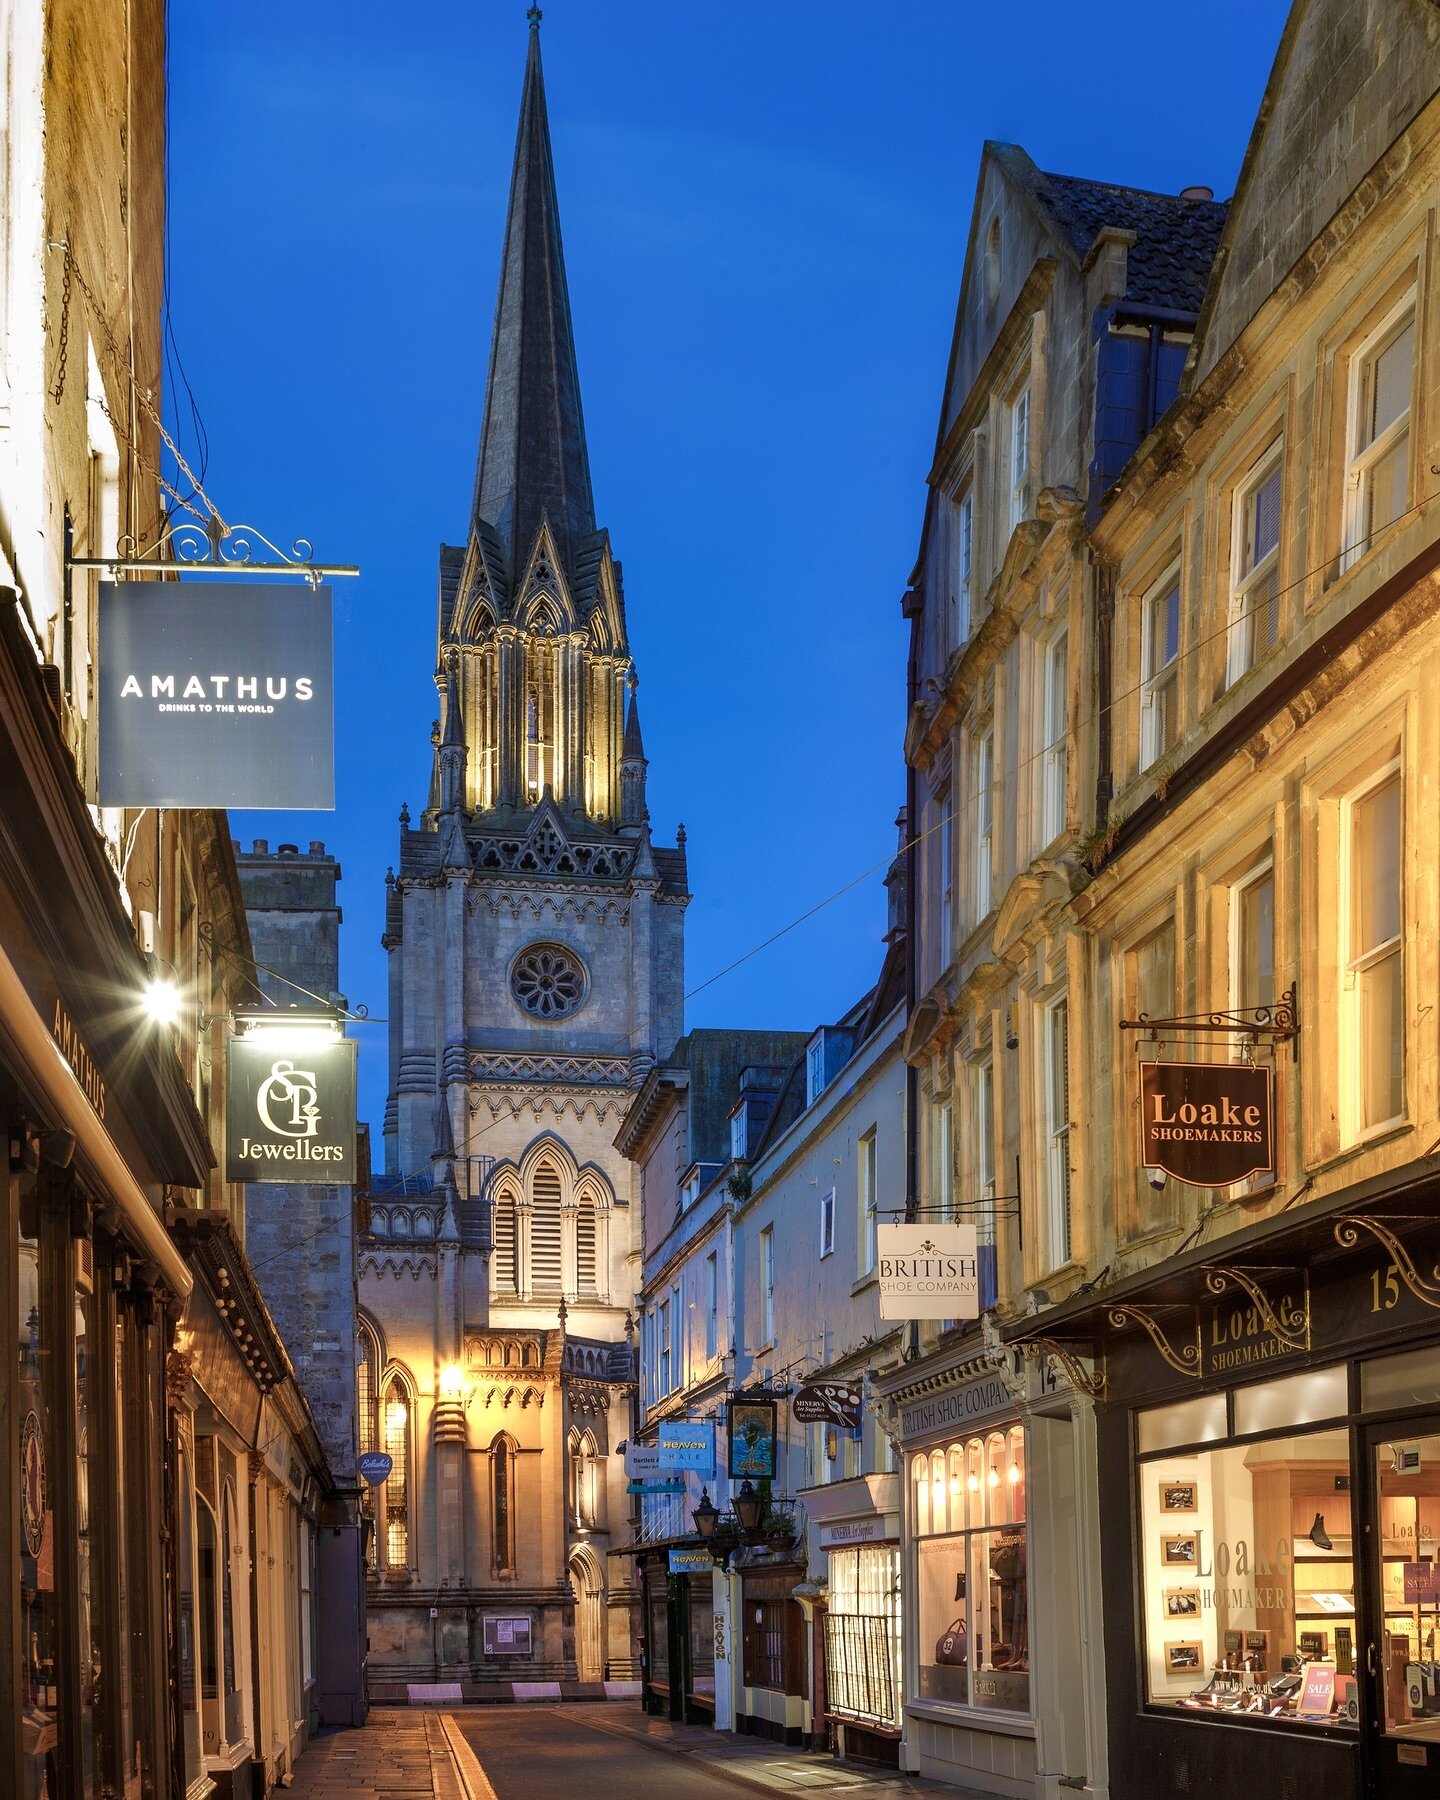 Bath at night is a time that it can feel like you have the entire place to yourself. It&rsquo;s one of those charming cities that looks equally beautiful by day and in the twilight.

Here&rsquo;s a wonderful place to explore and thankfully it&rsquo;s